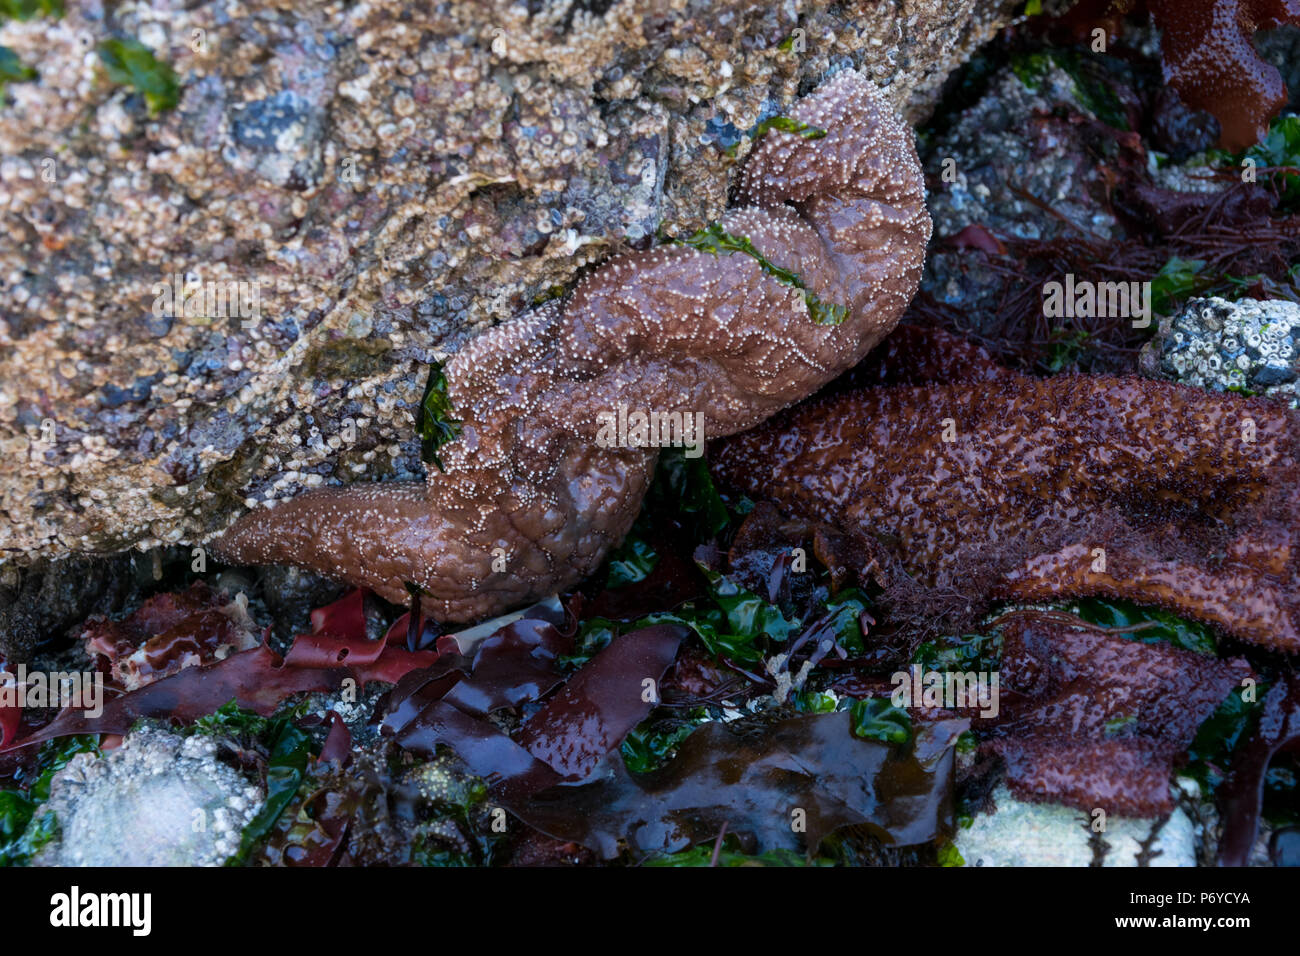 brown starfish on a rock surrounded by seaweed Stock Photo